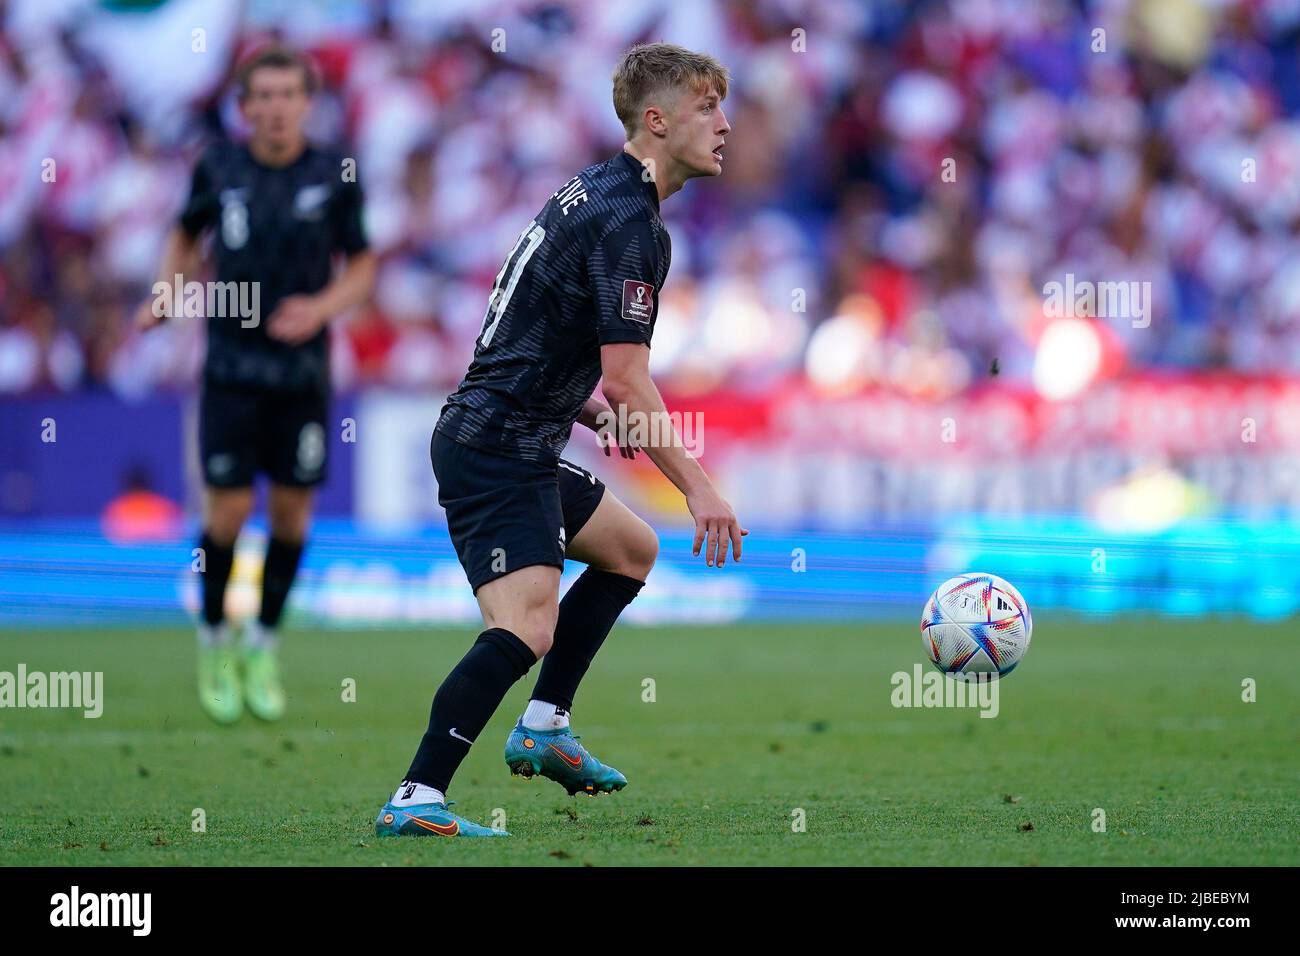 Barcelona, Spain. June 5, 2022, Alex Greive of New Zealand during the friendly match between Peru and New Zealand played at RCDE Stadium on June 5, 2022 in Barcelona, Spain. (Photo by Bagu Blanco / PRESSINPHOTO) Stock Photo